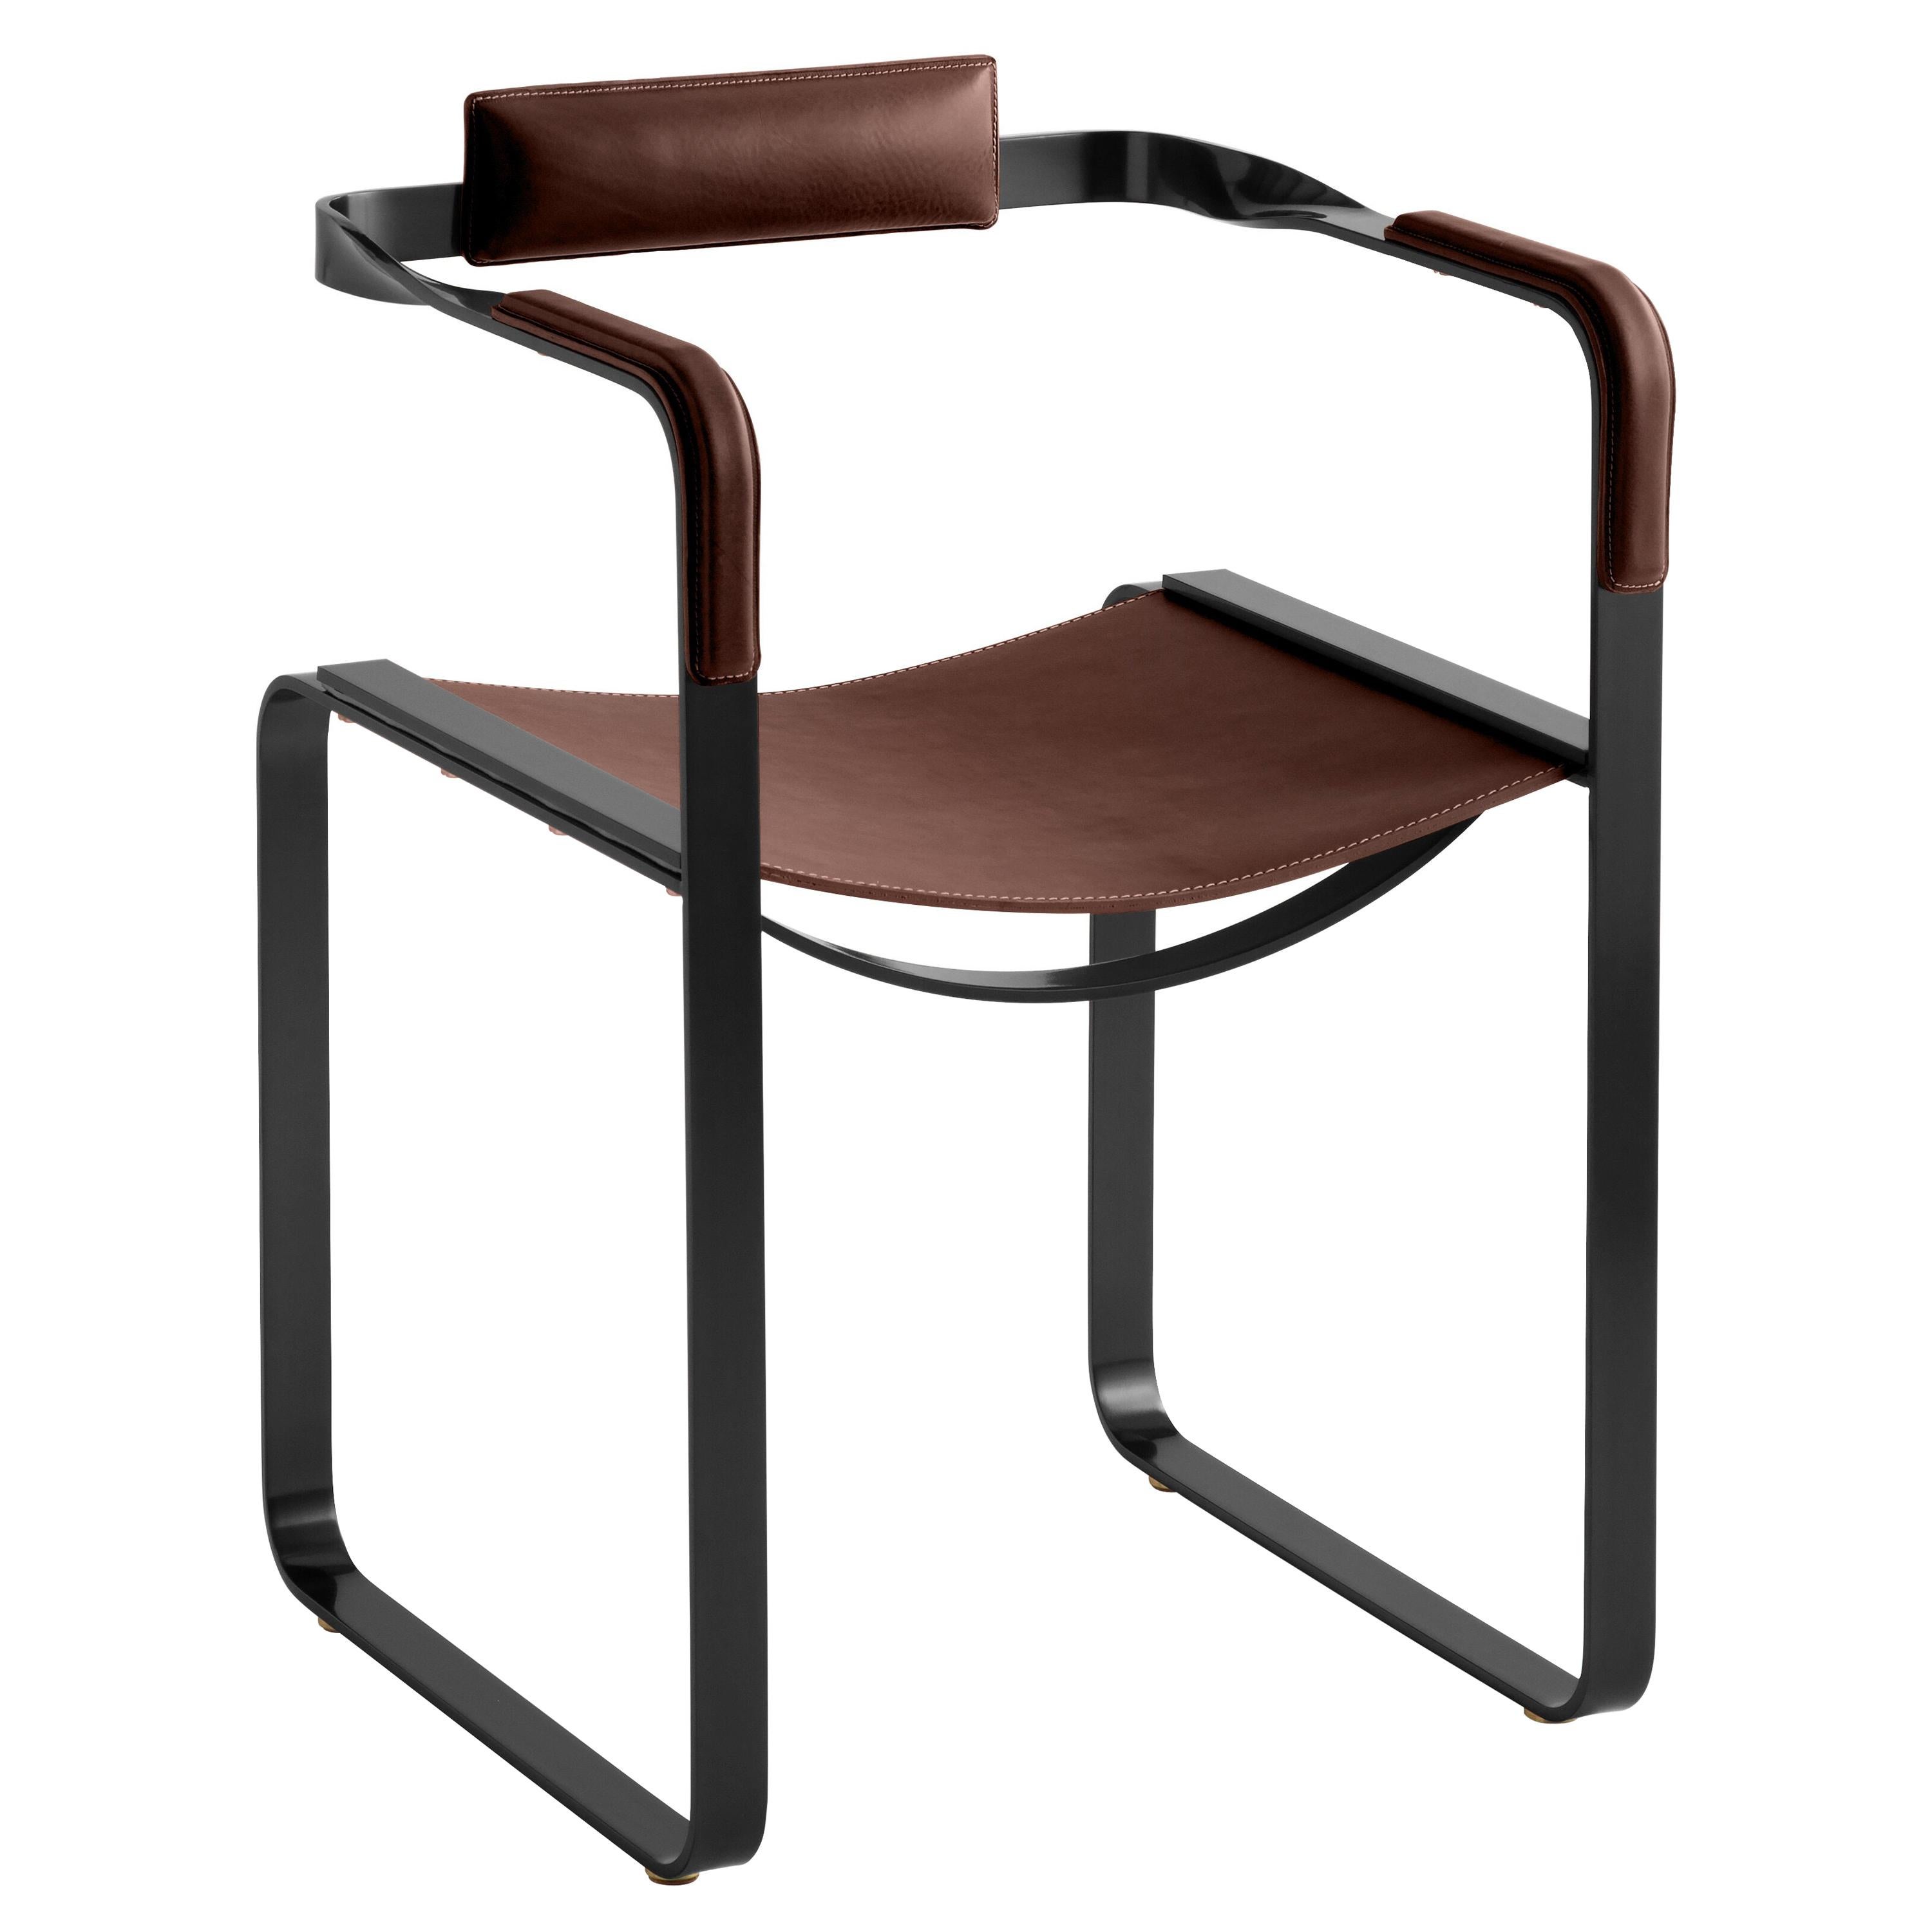 Armchair, Black Smoke Steel and Dark Brown Saddle Leather, Contemporary Design